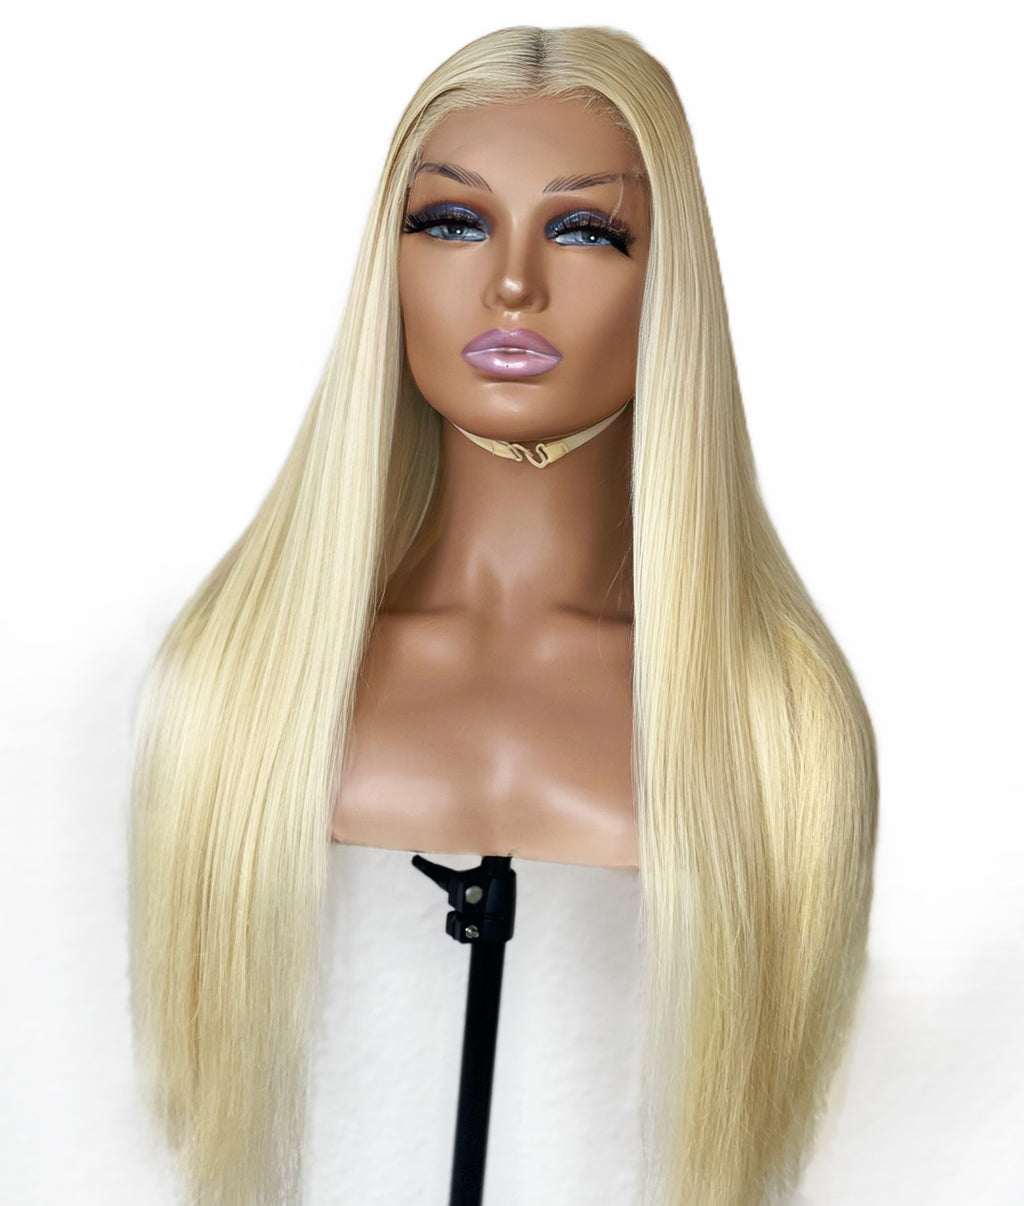 DIVA STRAIGHT BLOND HD Lace Human Hair wig,front side picture blond